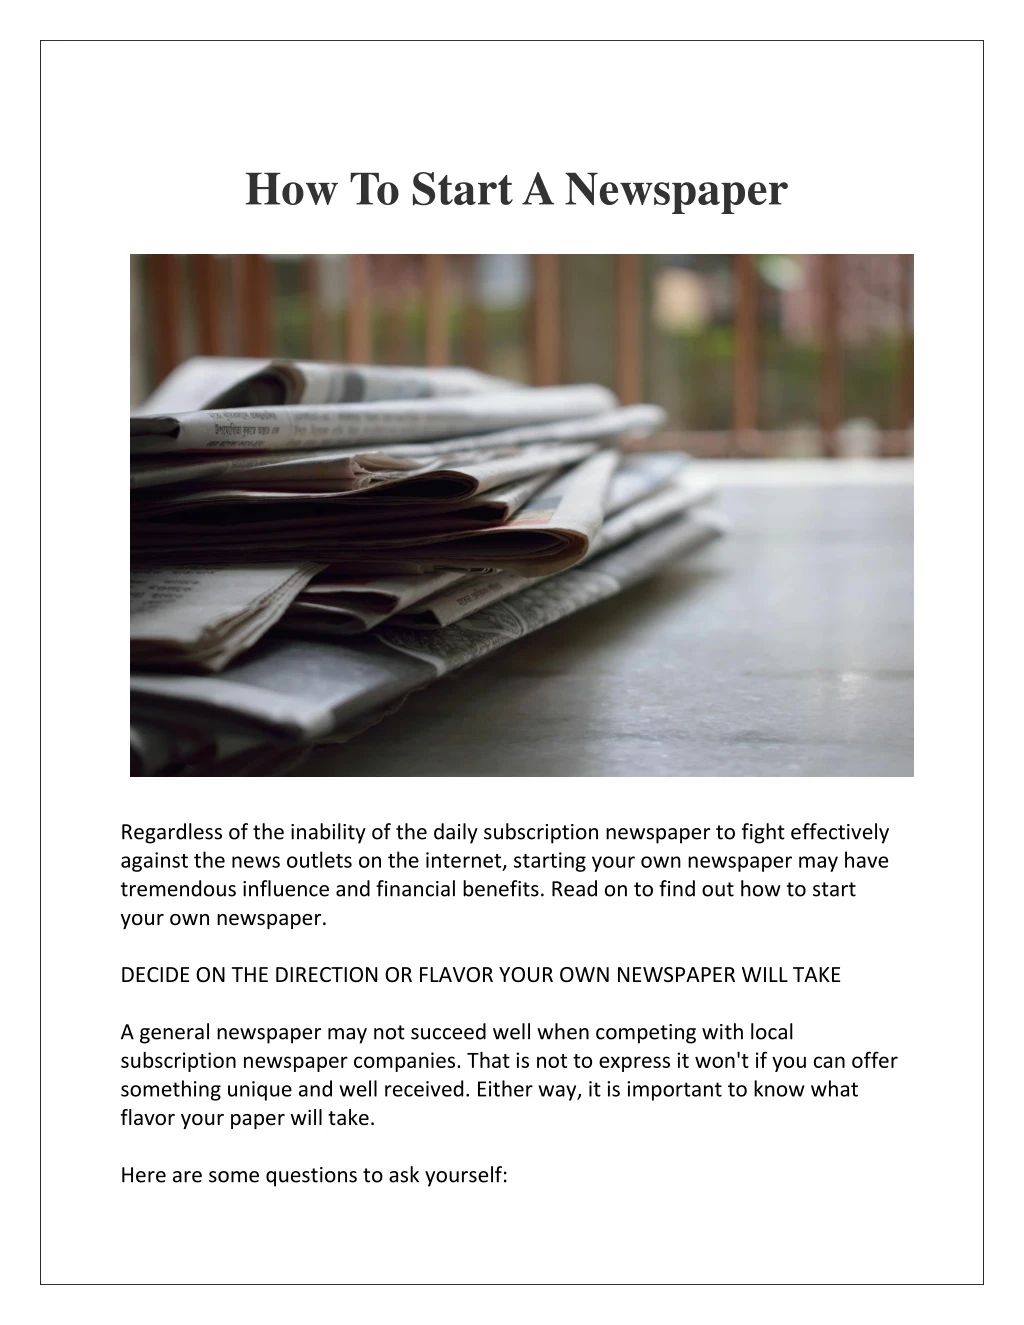 how to start a newspaper